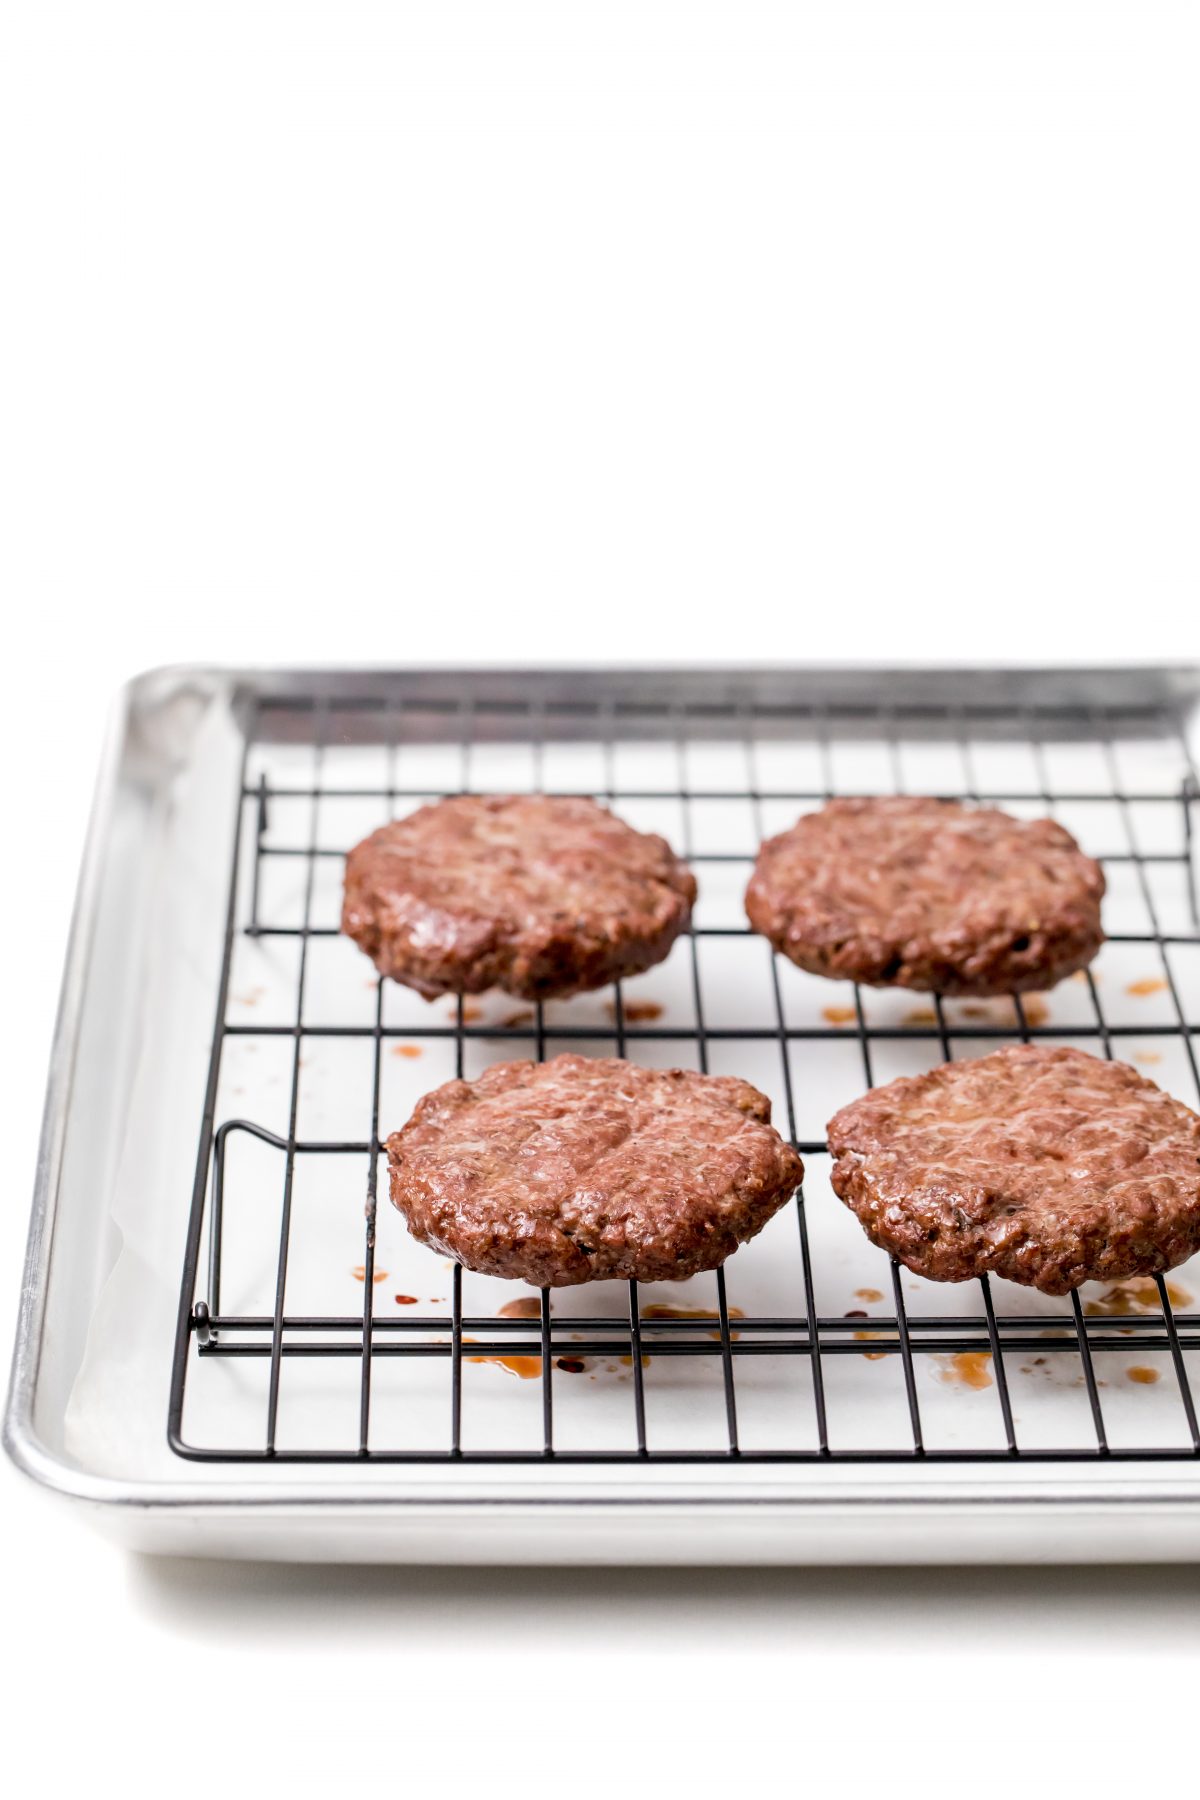 Oven baked burgers cooked burger patties on oven rack